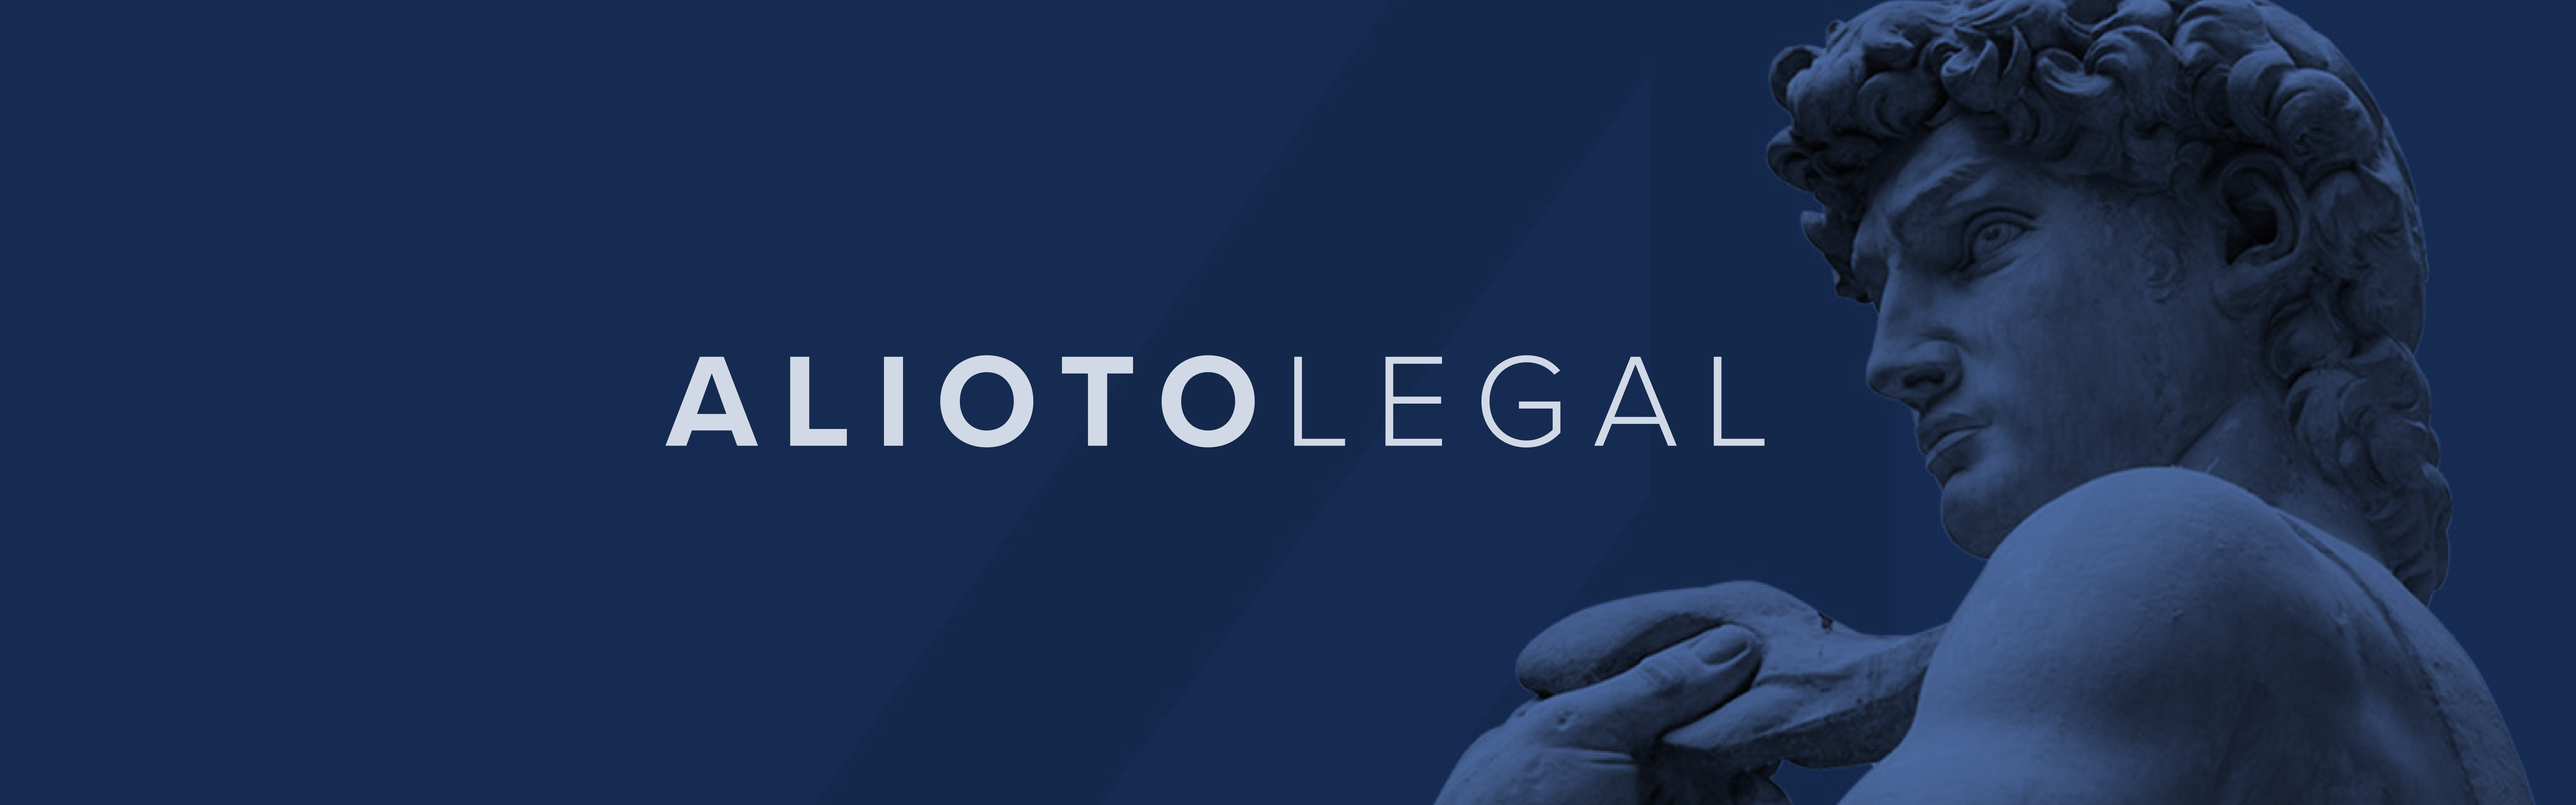 A banner featuring a classical statue on a blue background with the text "Alioto Legal".